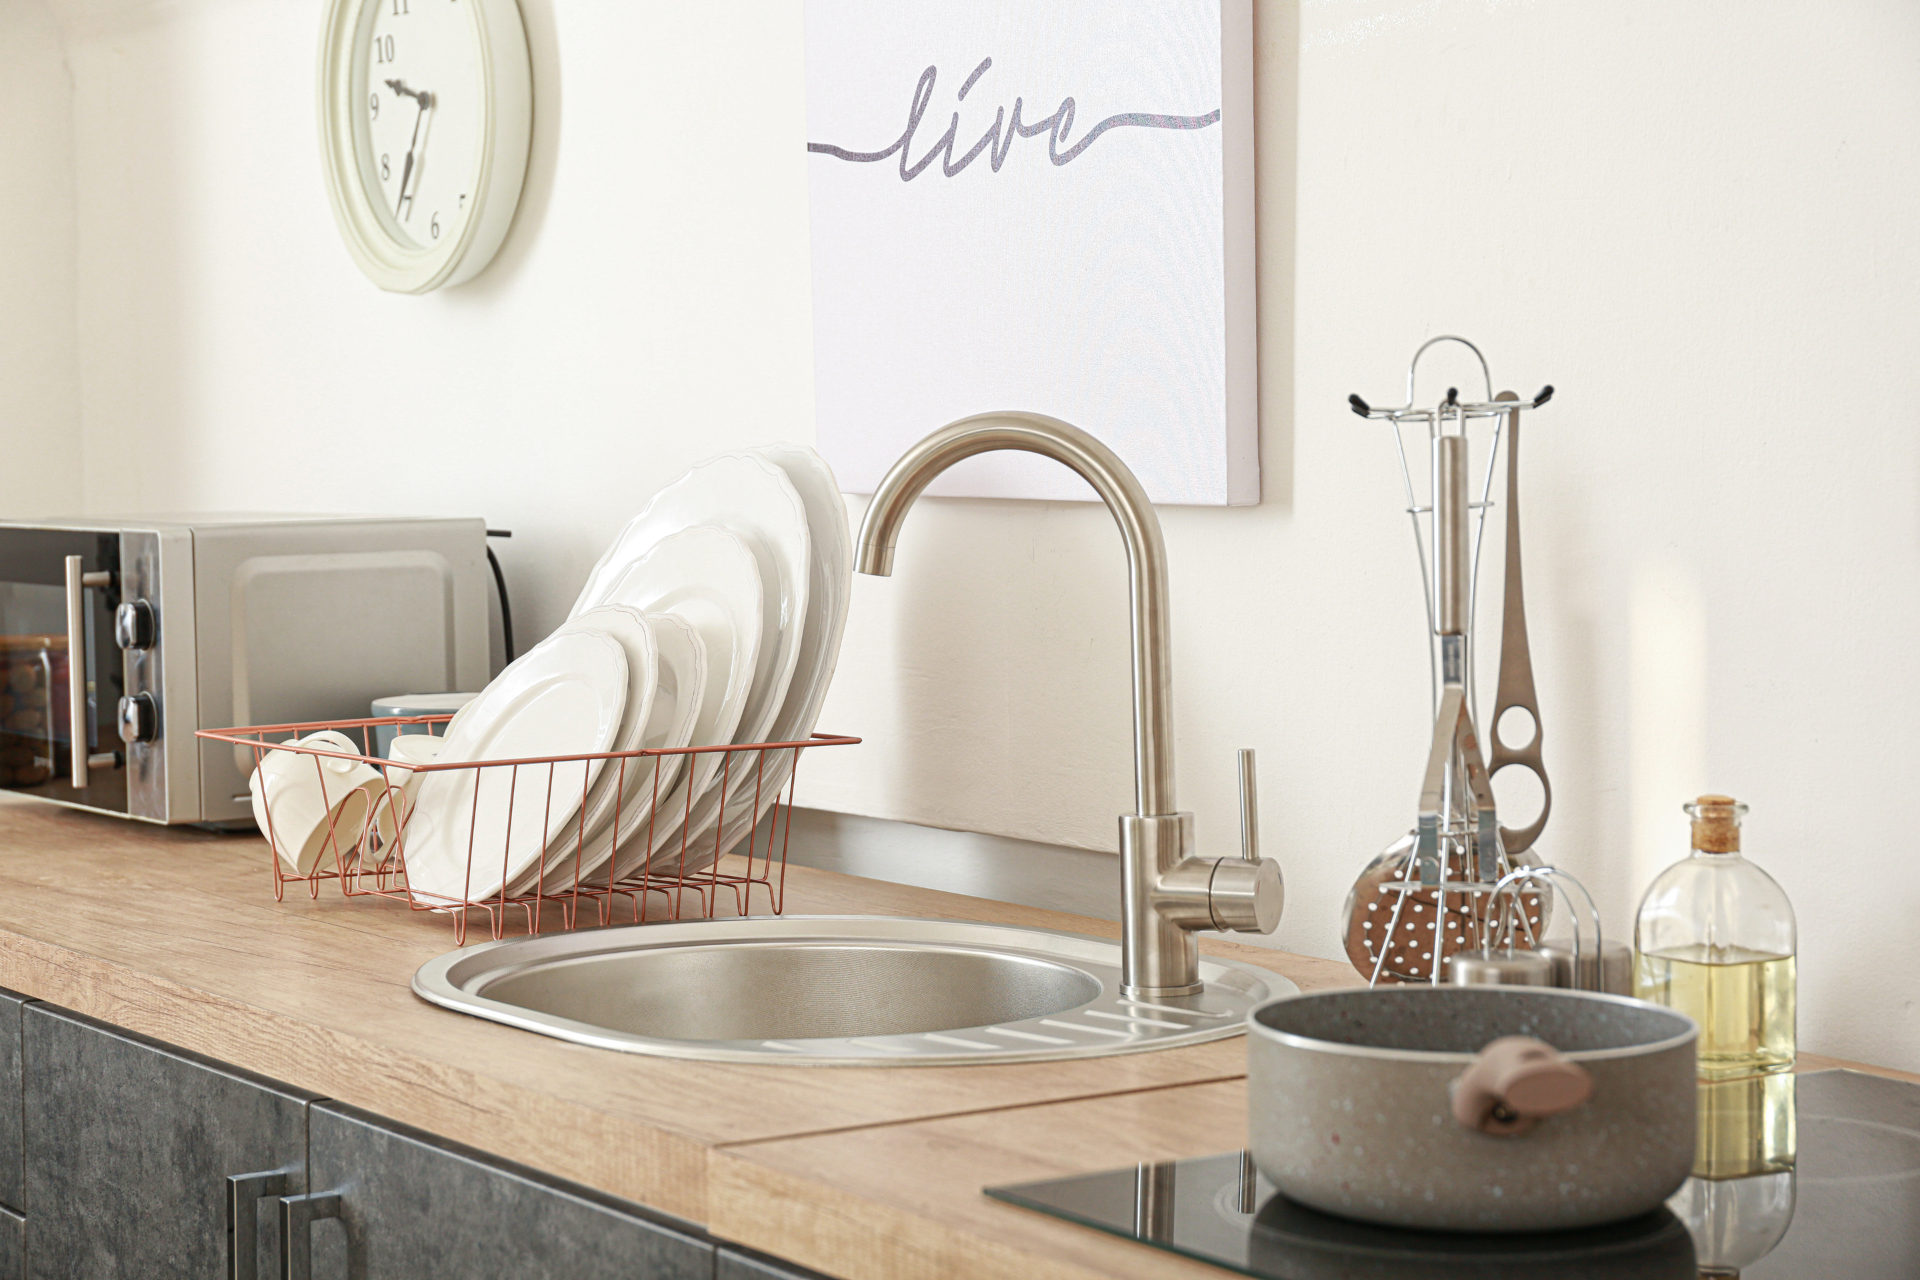 A kitchen with a sink , a clock , and a sign that says `` live ''.